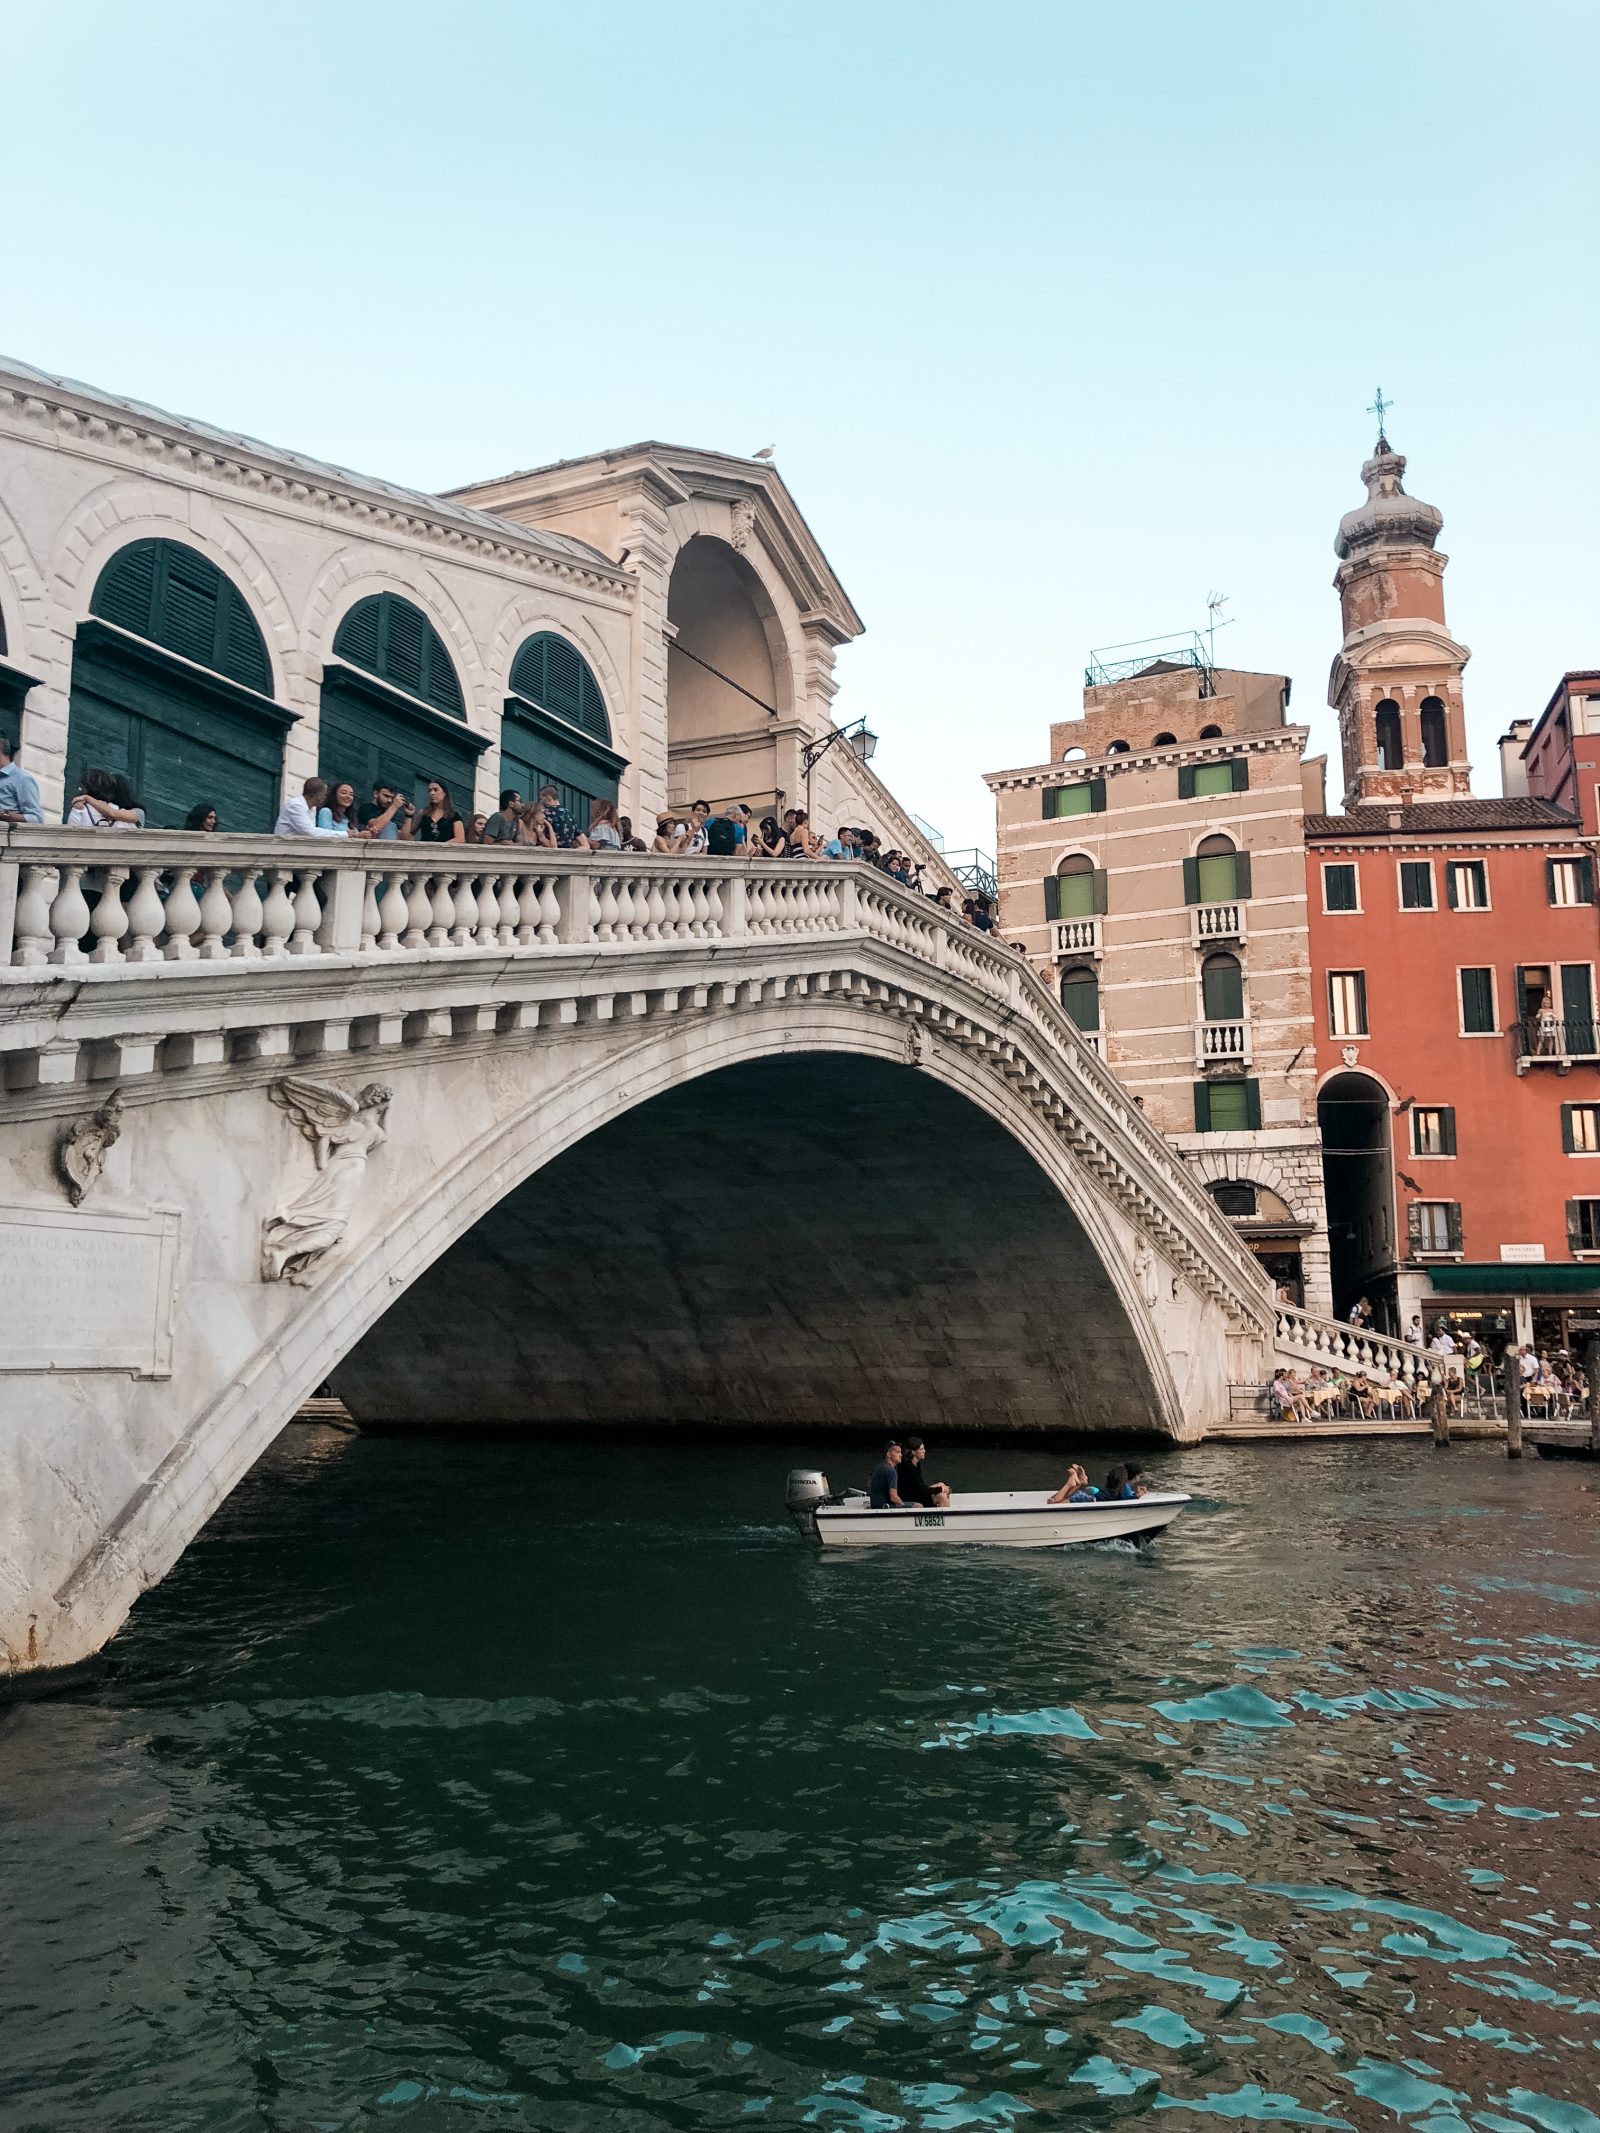 A picture of the Rialto bridge from an angle